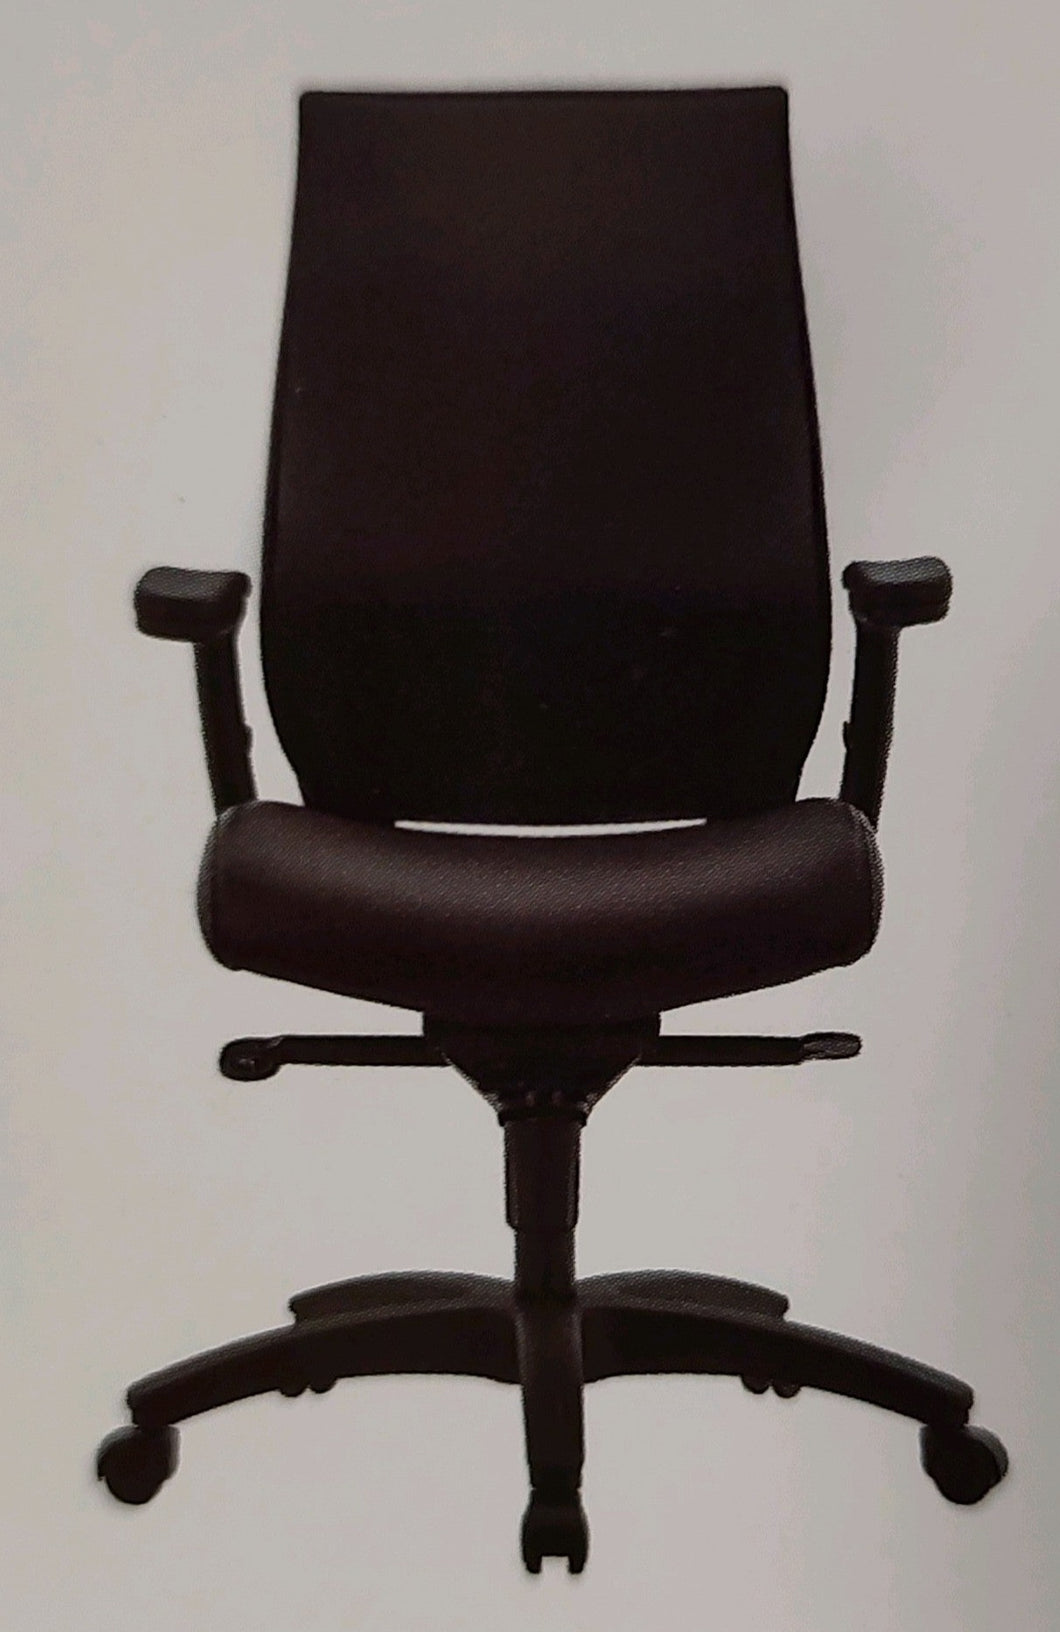 6956 Black Fabric Desk Chair w/Flip Up Arms/Lumbar Support $249.95 - 1 Only!